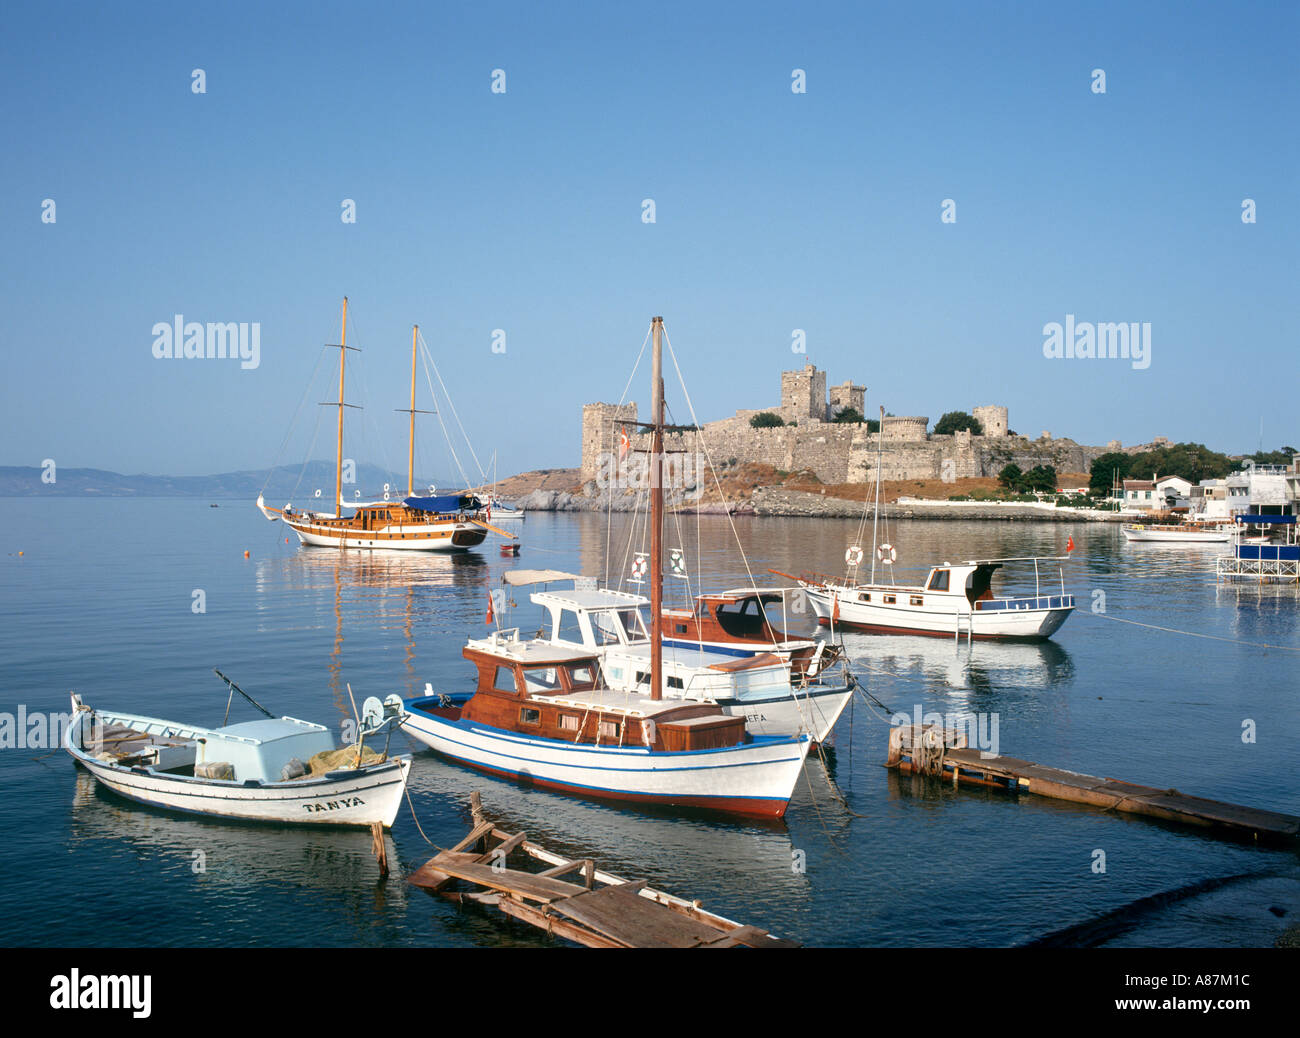 Bodrum Harbour with the castle in the background, Bodrum, Turkey Stock Photo